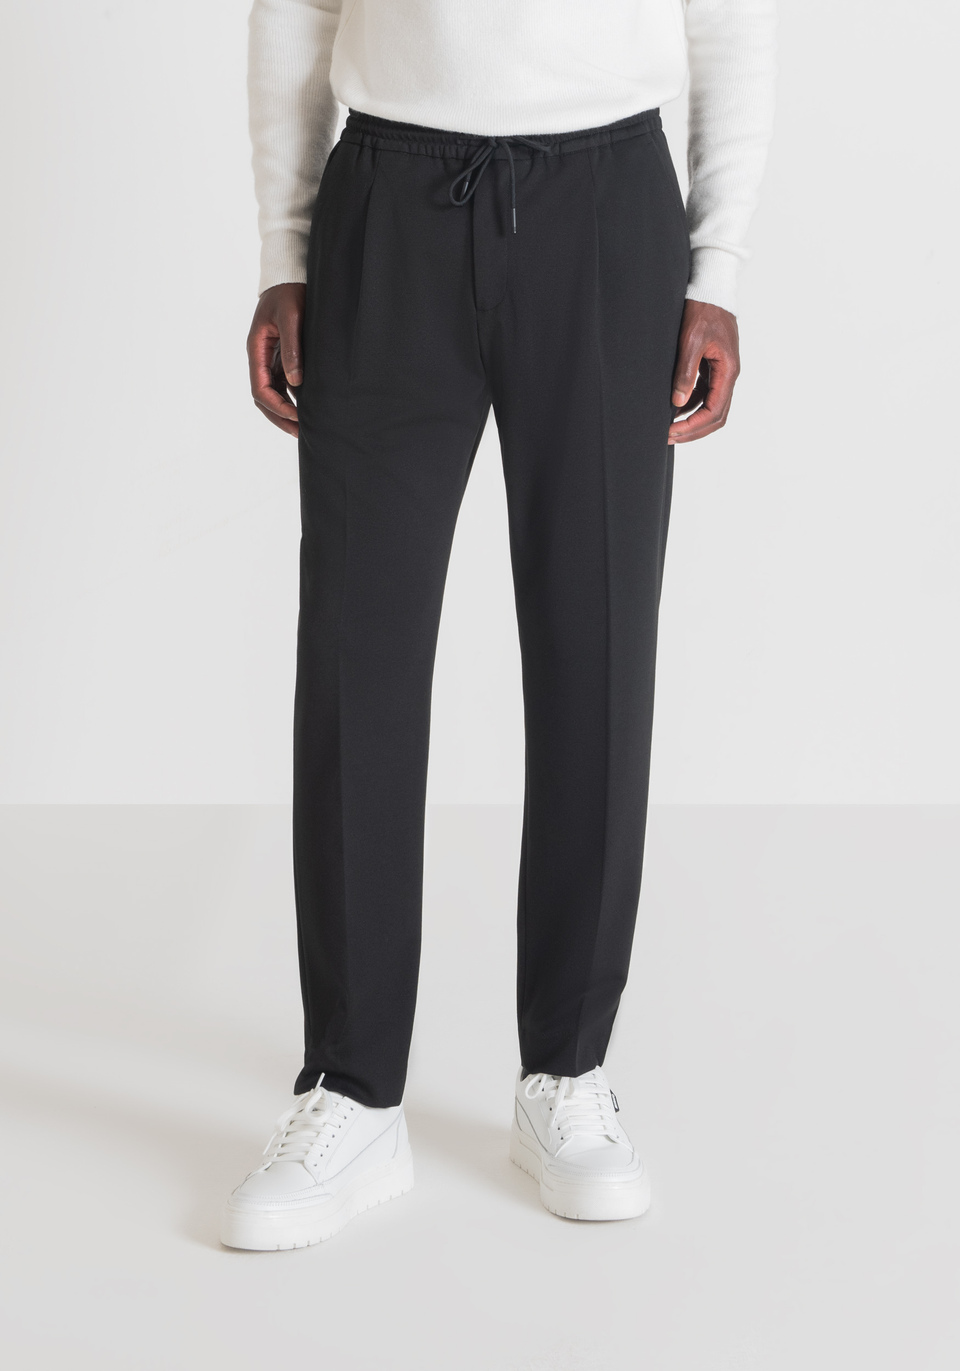 "NEIL" REGULAR FIT TROUSERS IN STRETCH VISCOSE BLEND FABRIC WITH CENTRAL CREASE - Antony Morato Online Shop